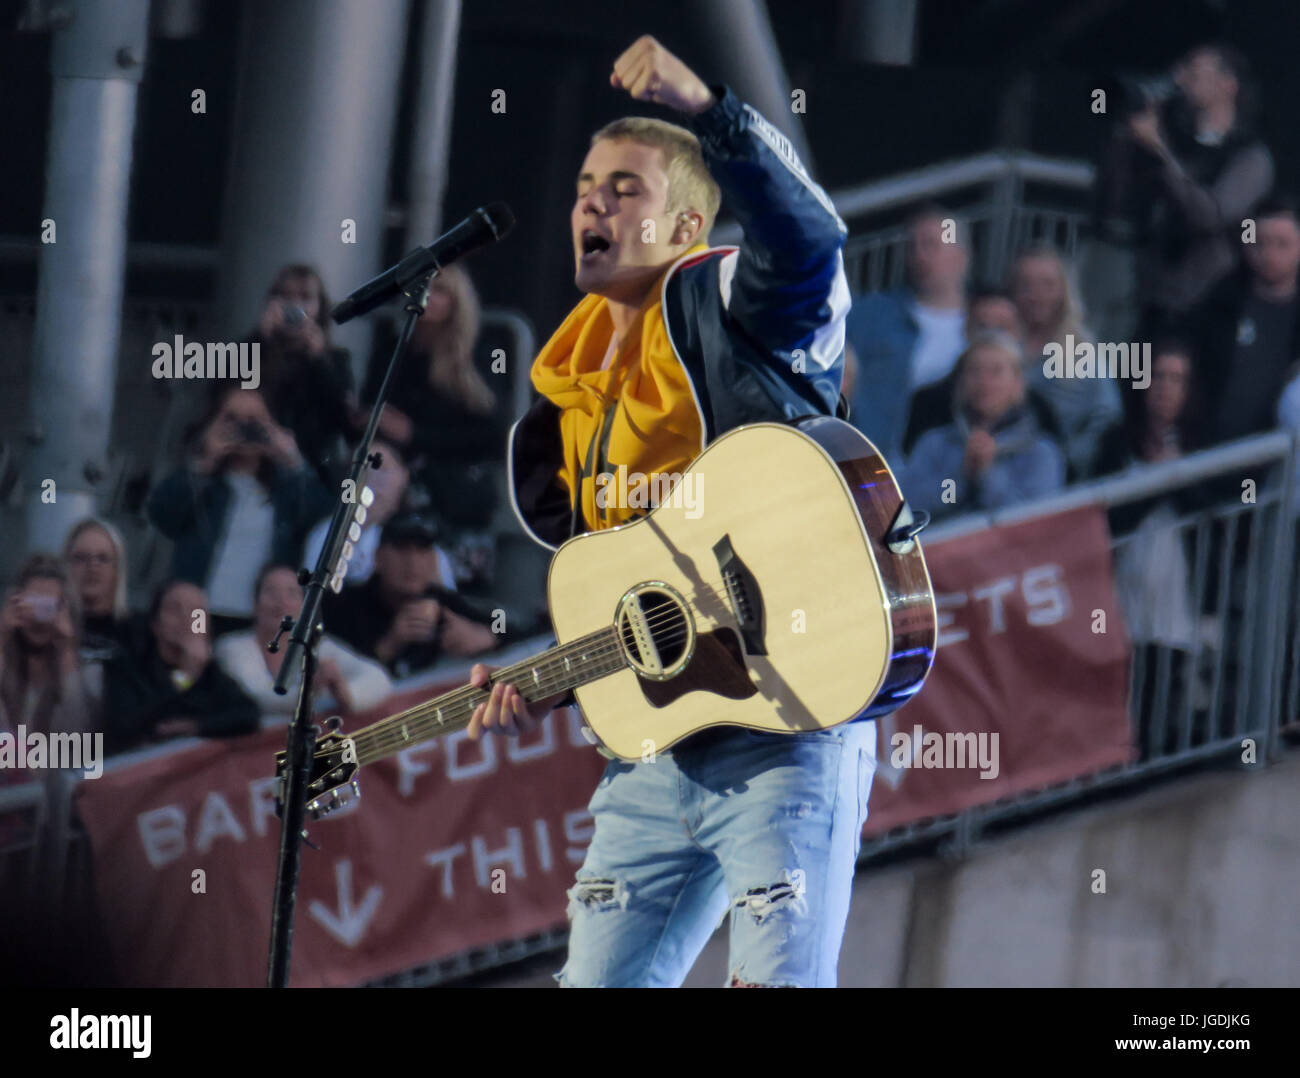 One Love Manchester concert - Performers join Ariana Grande at Old Trafford Cricket Ground in a concert to benefit the victims of the terror attack after her Manchester show last month.  Featuring: Justin Bieber Where: Manchester, United Kingdom When: 04 Jun 2017 Credit: WENN.com Stock Photo